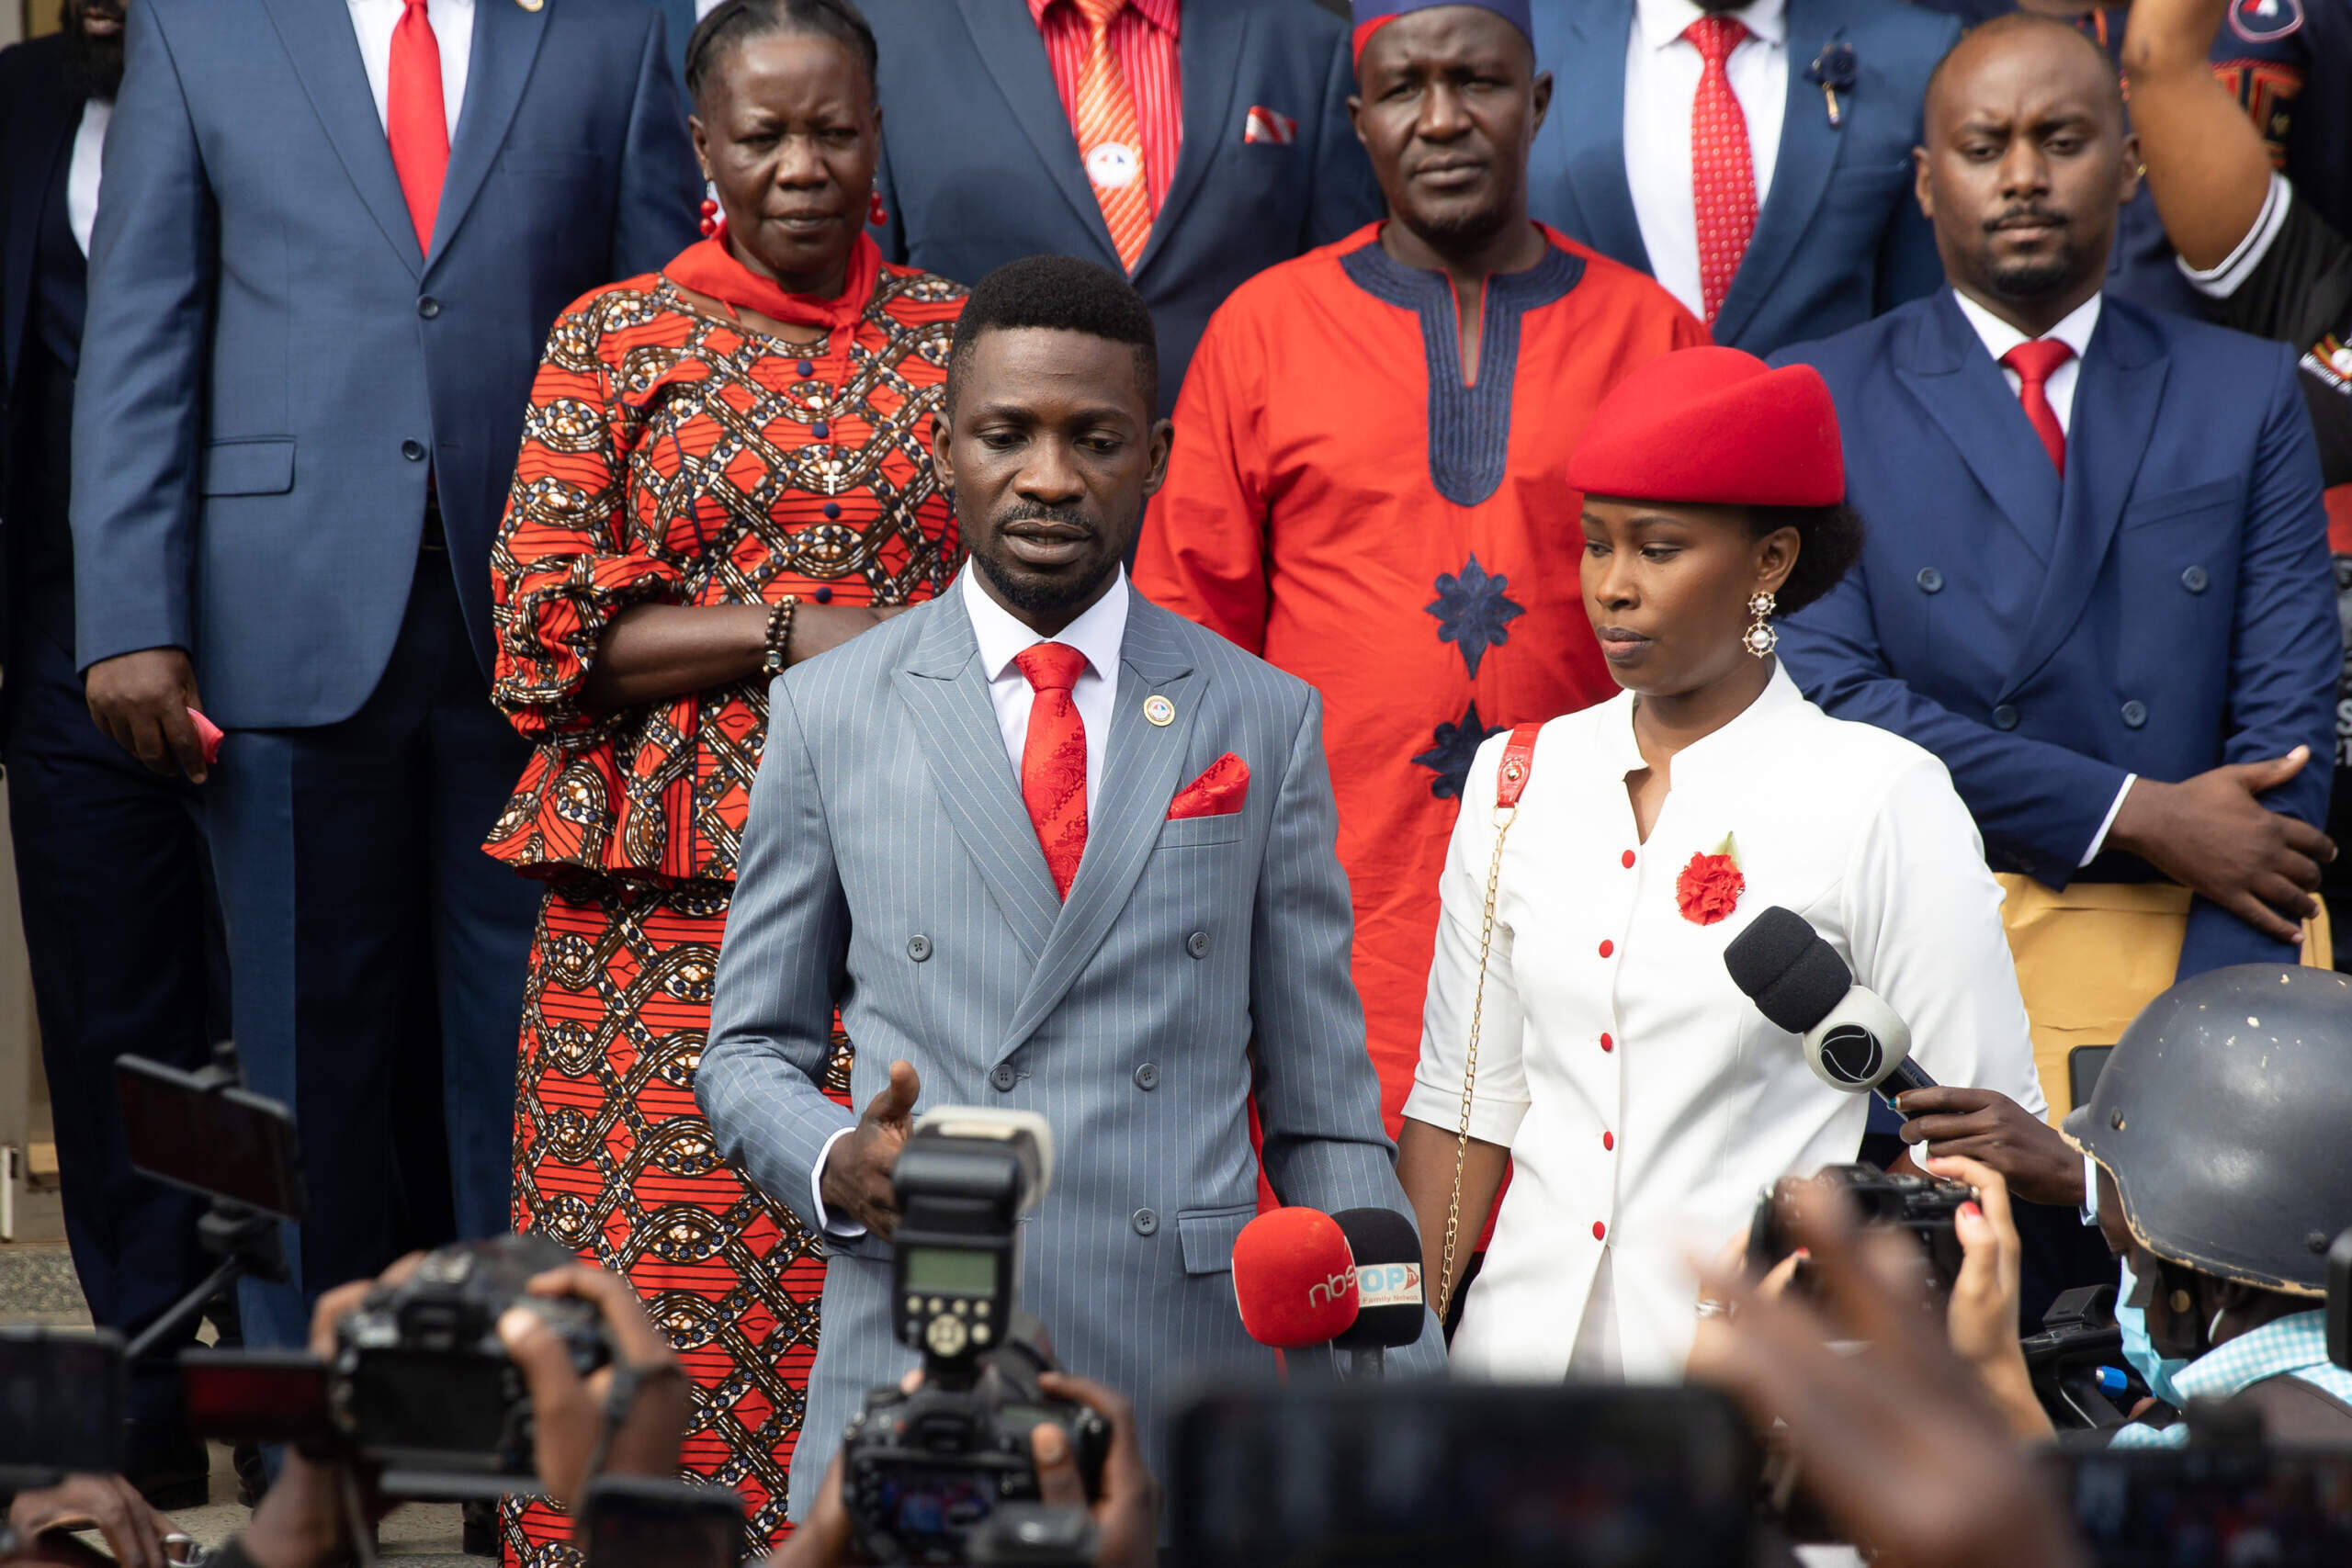 Bobi Wine and his wife, Barbie Itungo Kyagulany, address the media before leaving their house for the Presidential Nominations on November 03, 2020 in Kampala, Uganda. Popular singer Robert Kyagulanyi Ssentamu, better known by his stage name of H.E. Bobi Wine, is set to appear before the Independent Electoral Commission this morning to be nominated to stand against incumbent Yoweri Museveni in the up coming Presidential elections in Uganda. (Photo by Luke Dray/Getty Images)